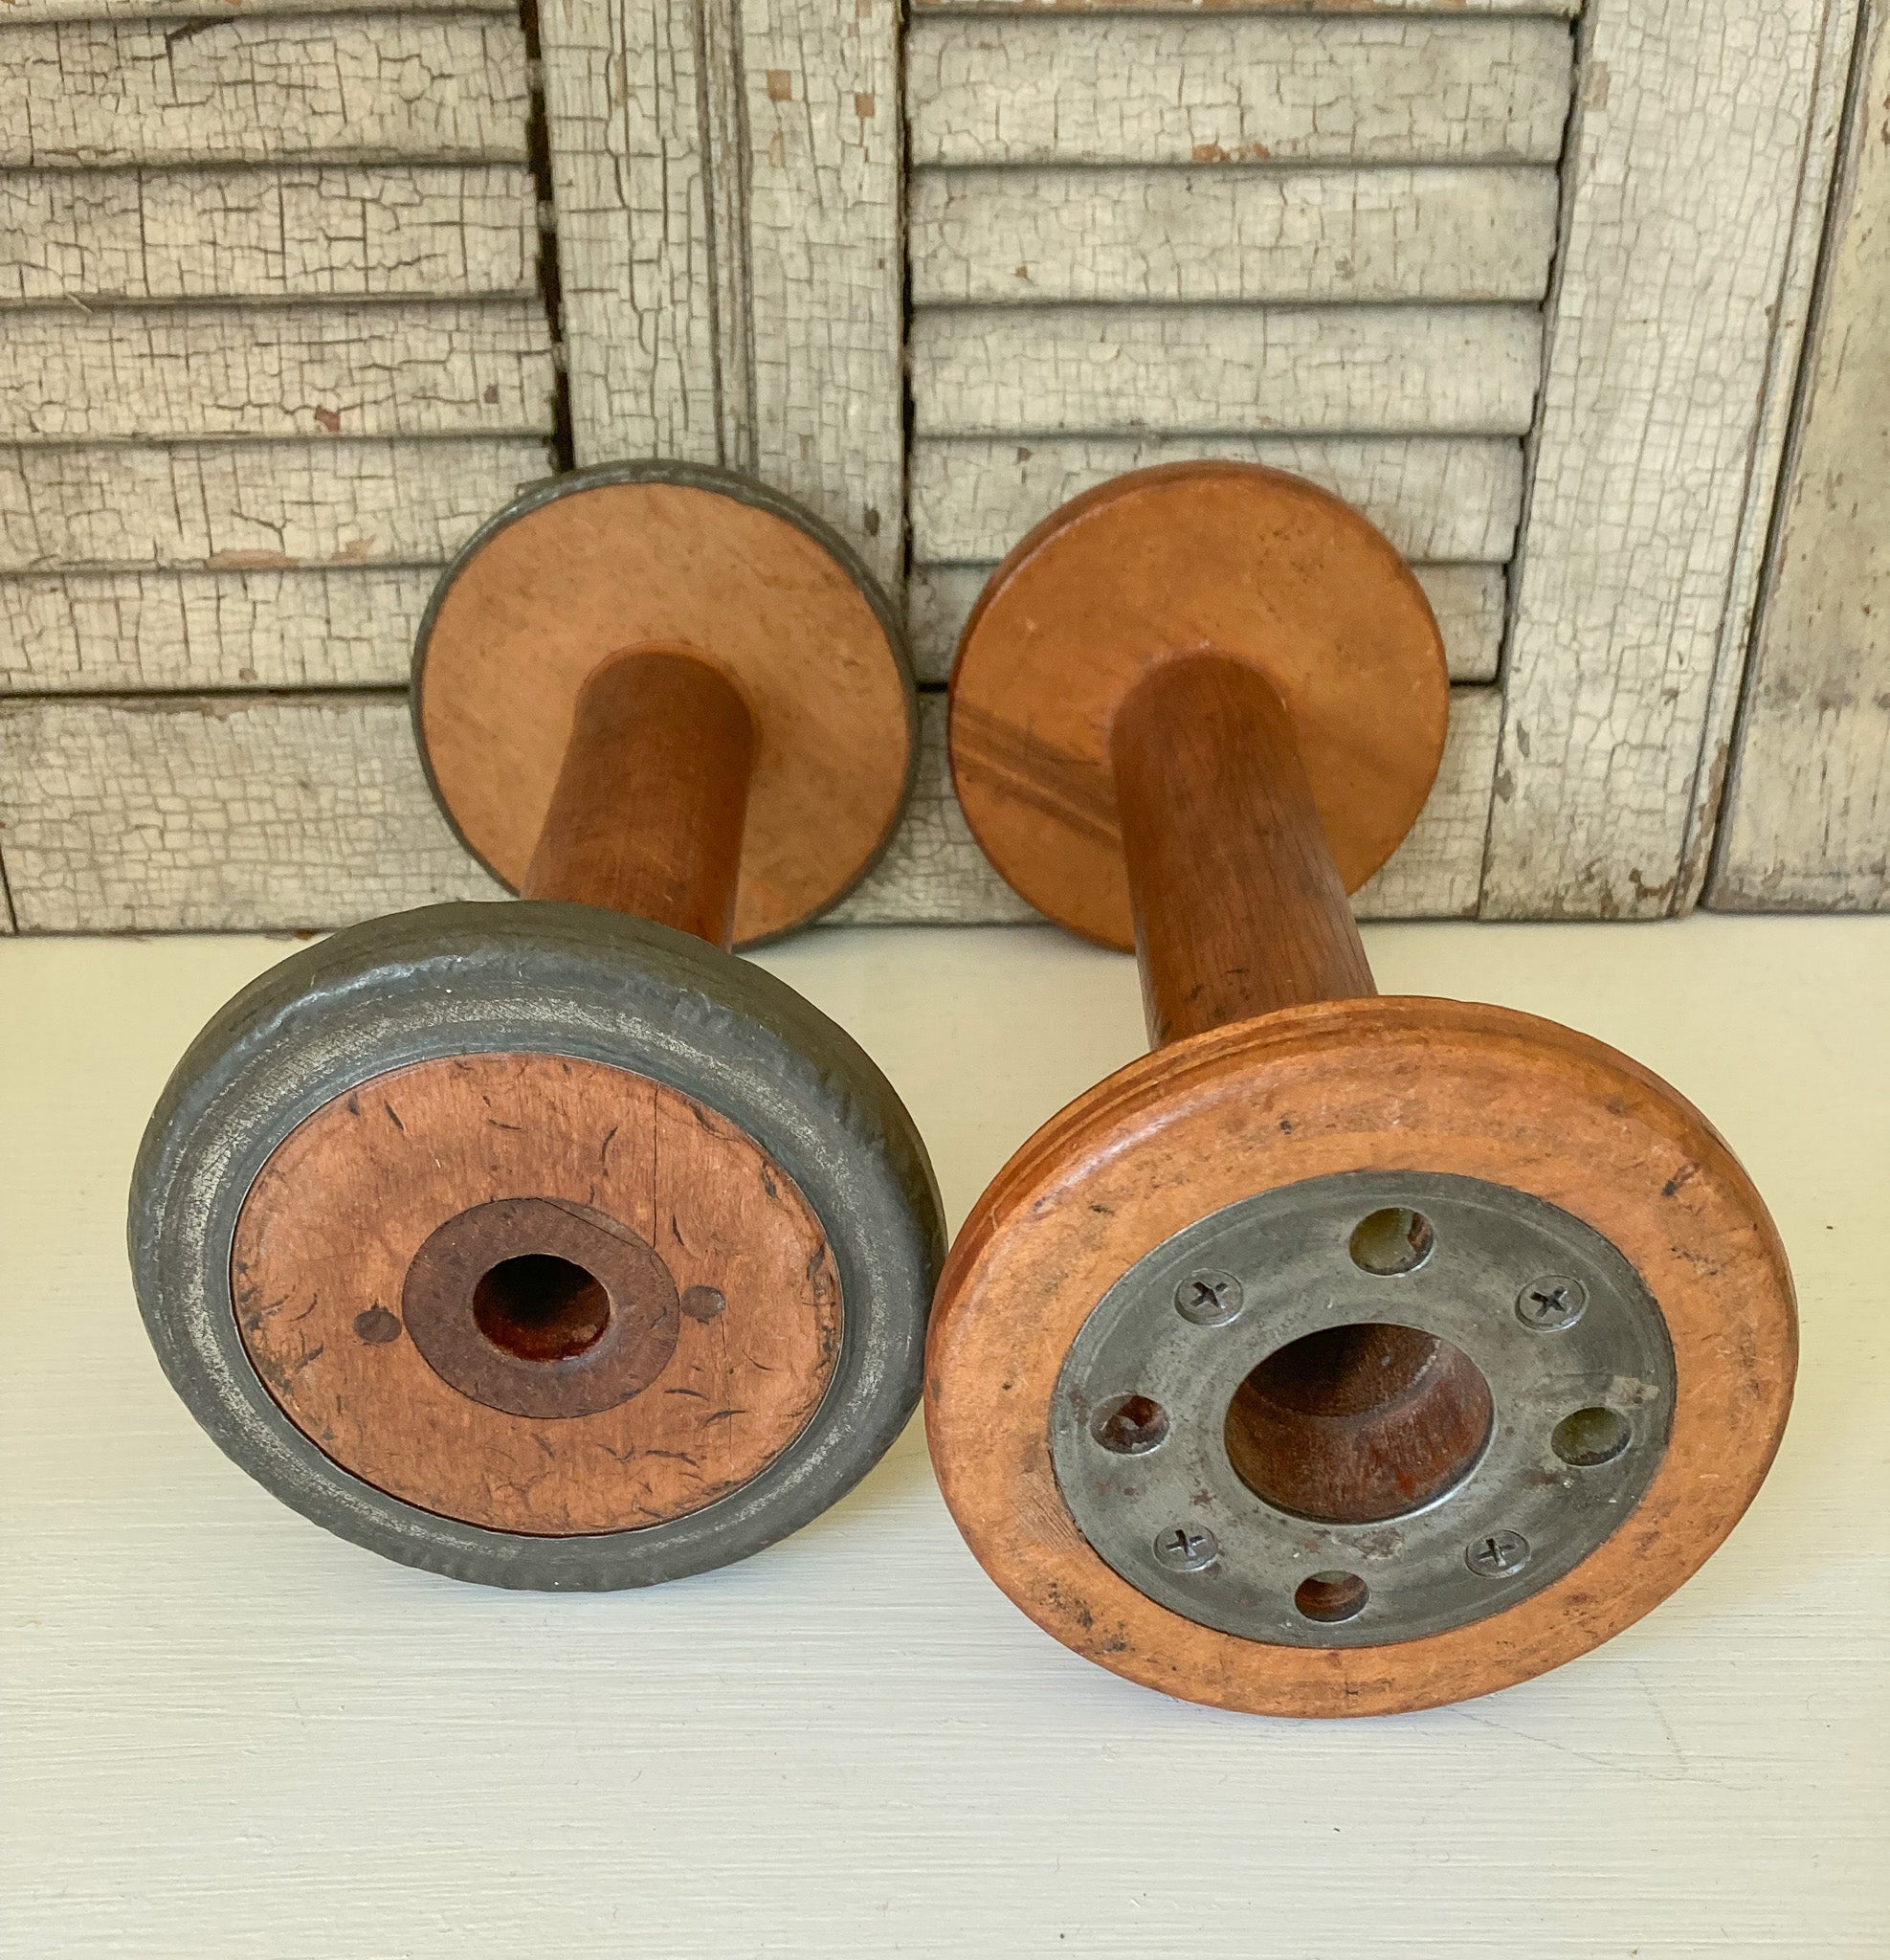 Set of 2 Large Wooden Spools, 12” and 10.5”